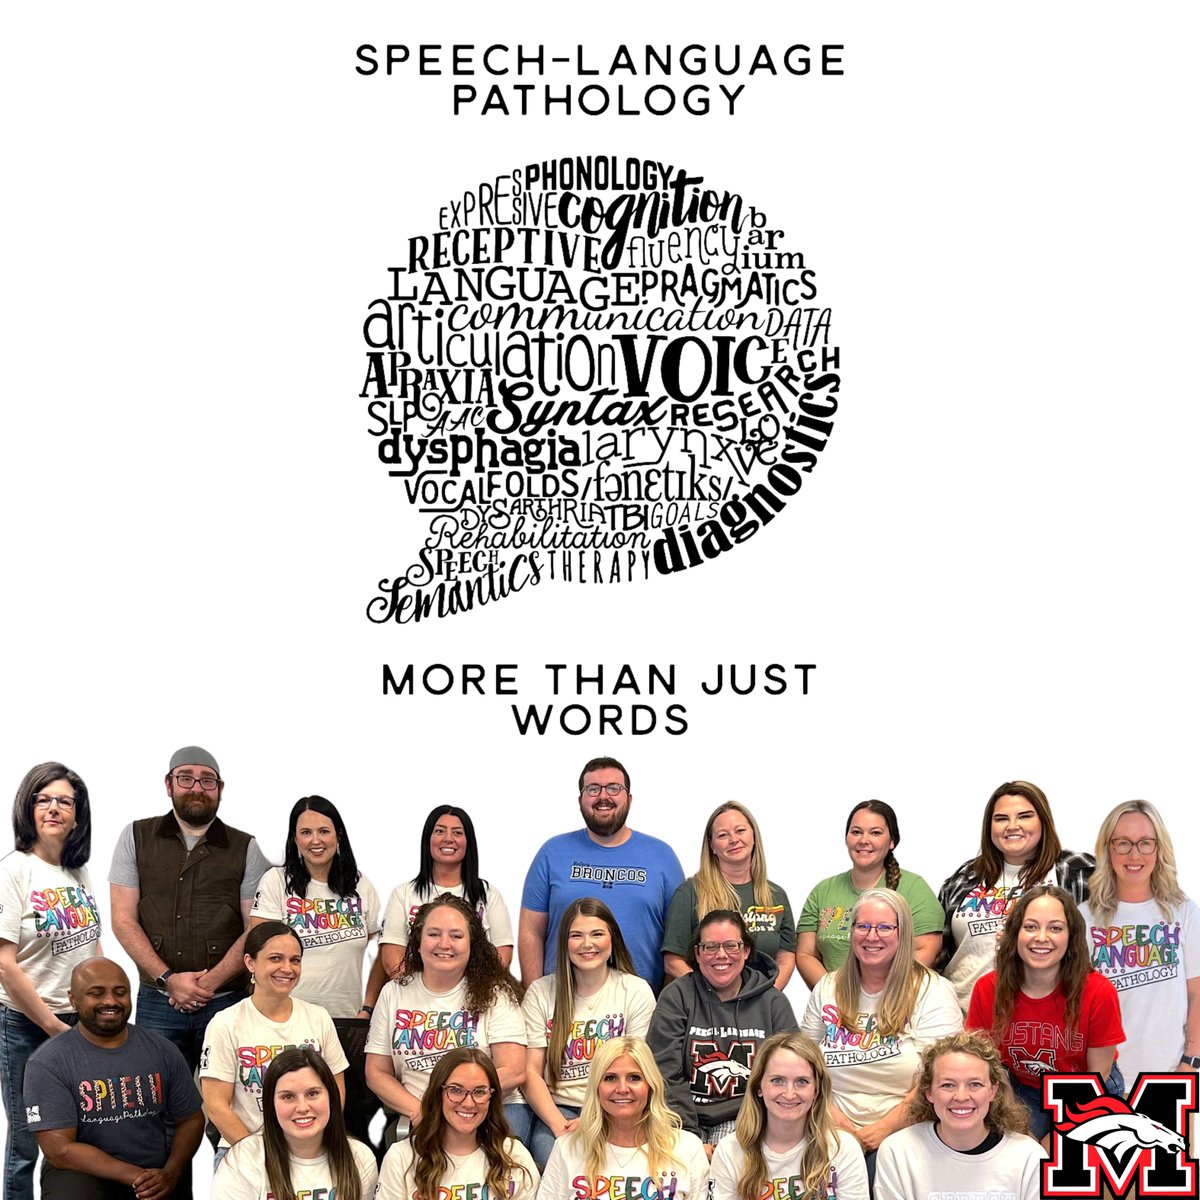 School may be out for #SummerBreak, but today is Speech Pathologist Day. #MPSThanksYou for all you do for our students, and we hope you have a restful and relaxing Summer!